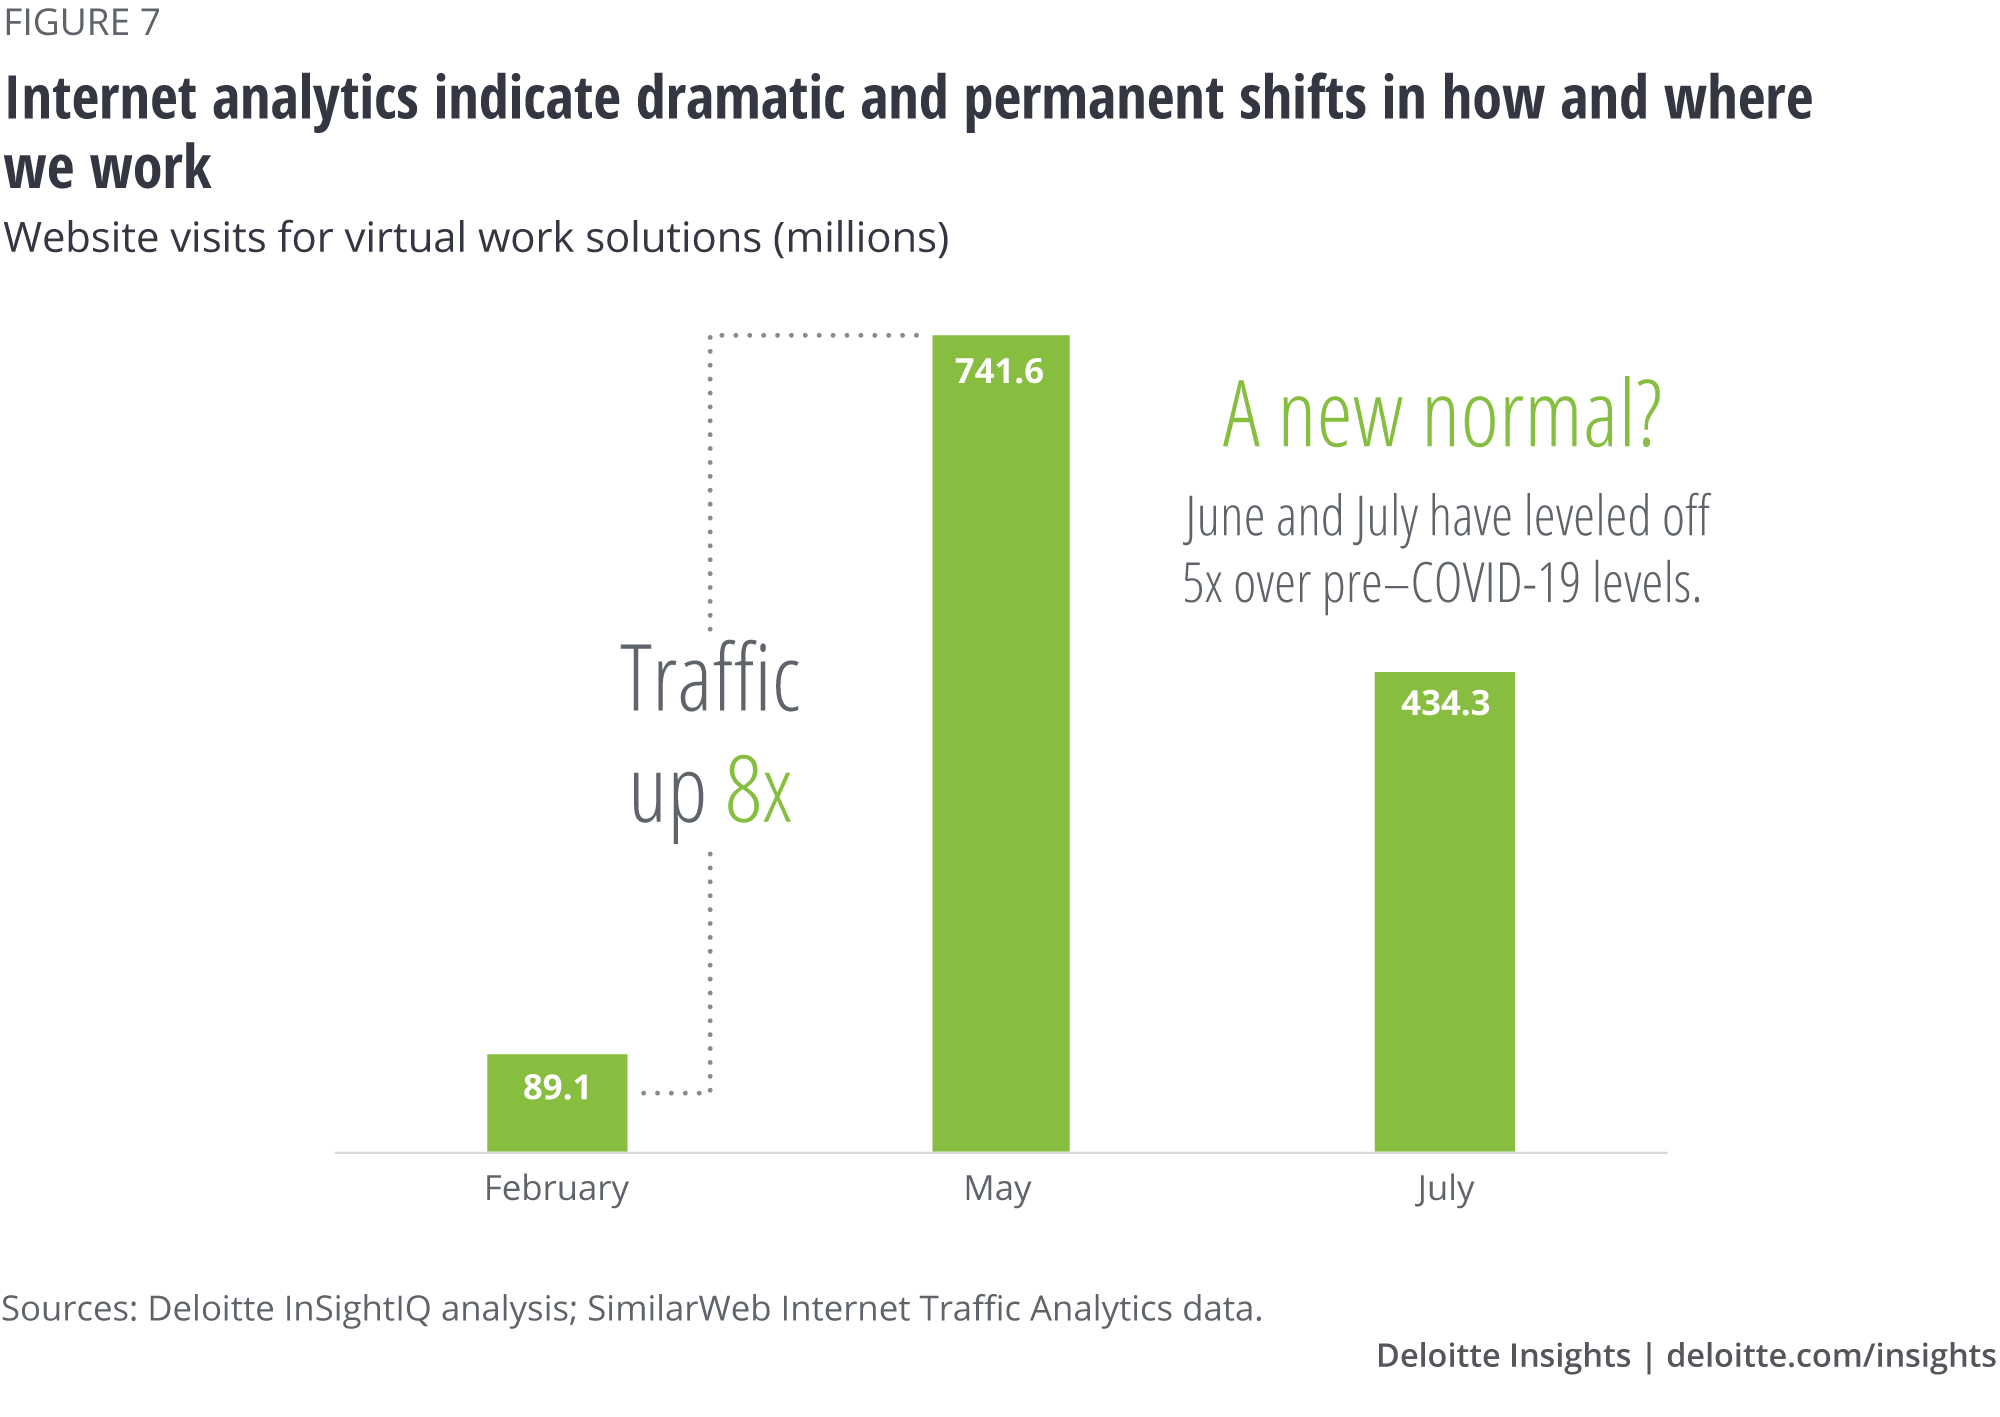 Internet analytics indicate dramatic and permanent shifts in how and where we work